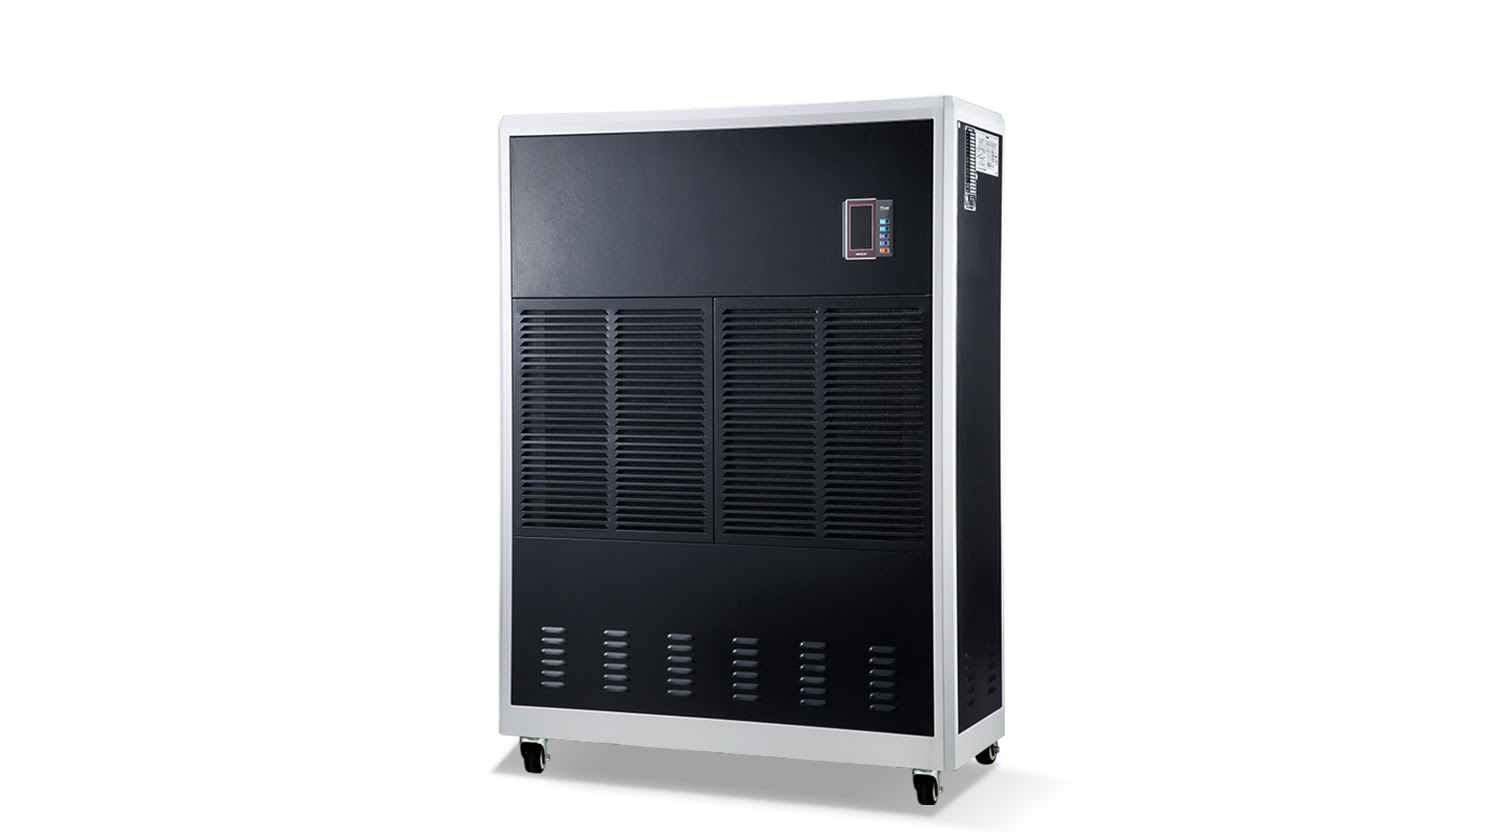 Humidity control of Dehumidifier in daily living environment